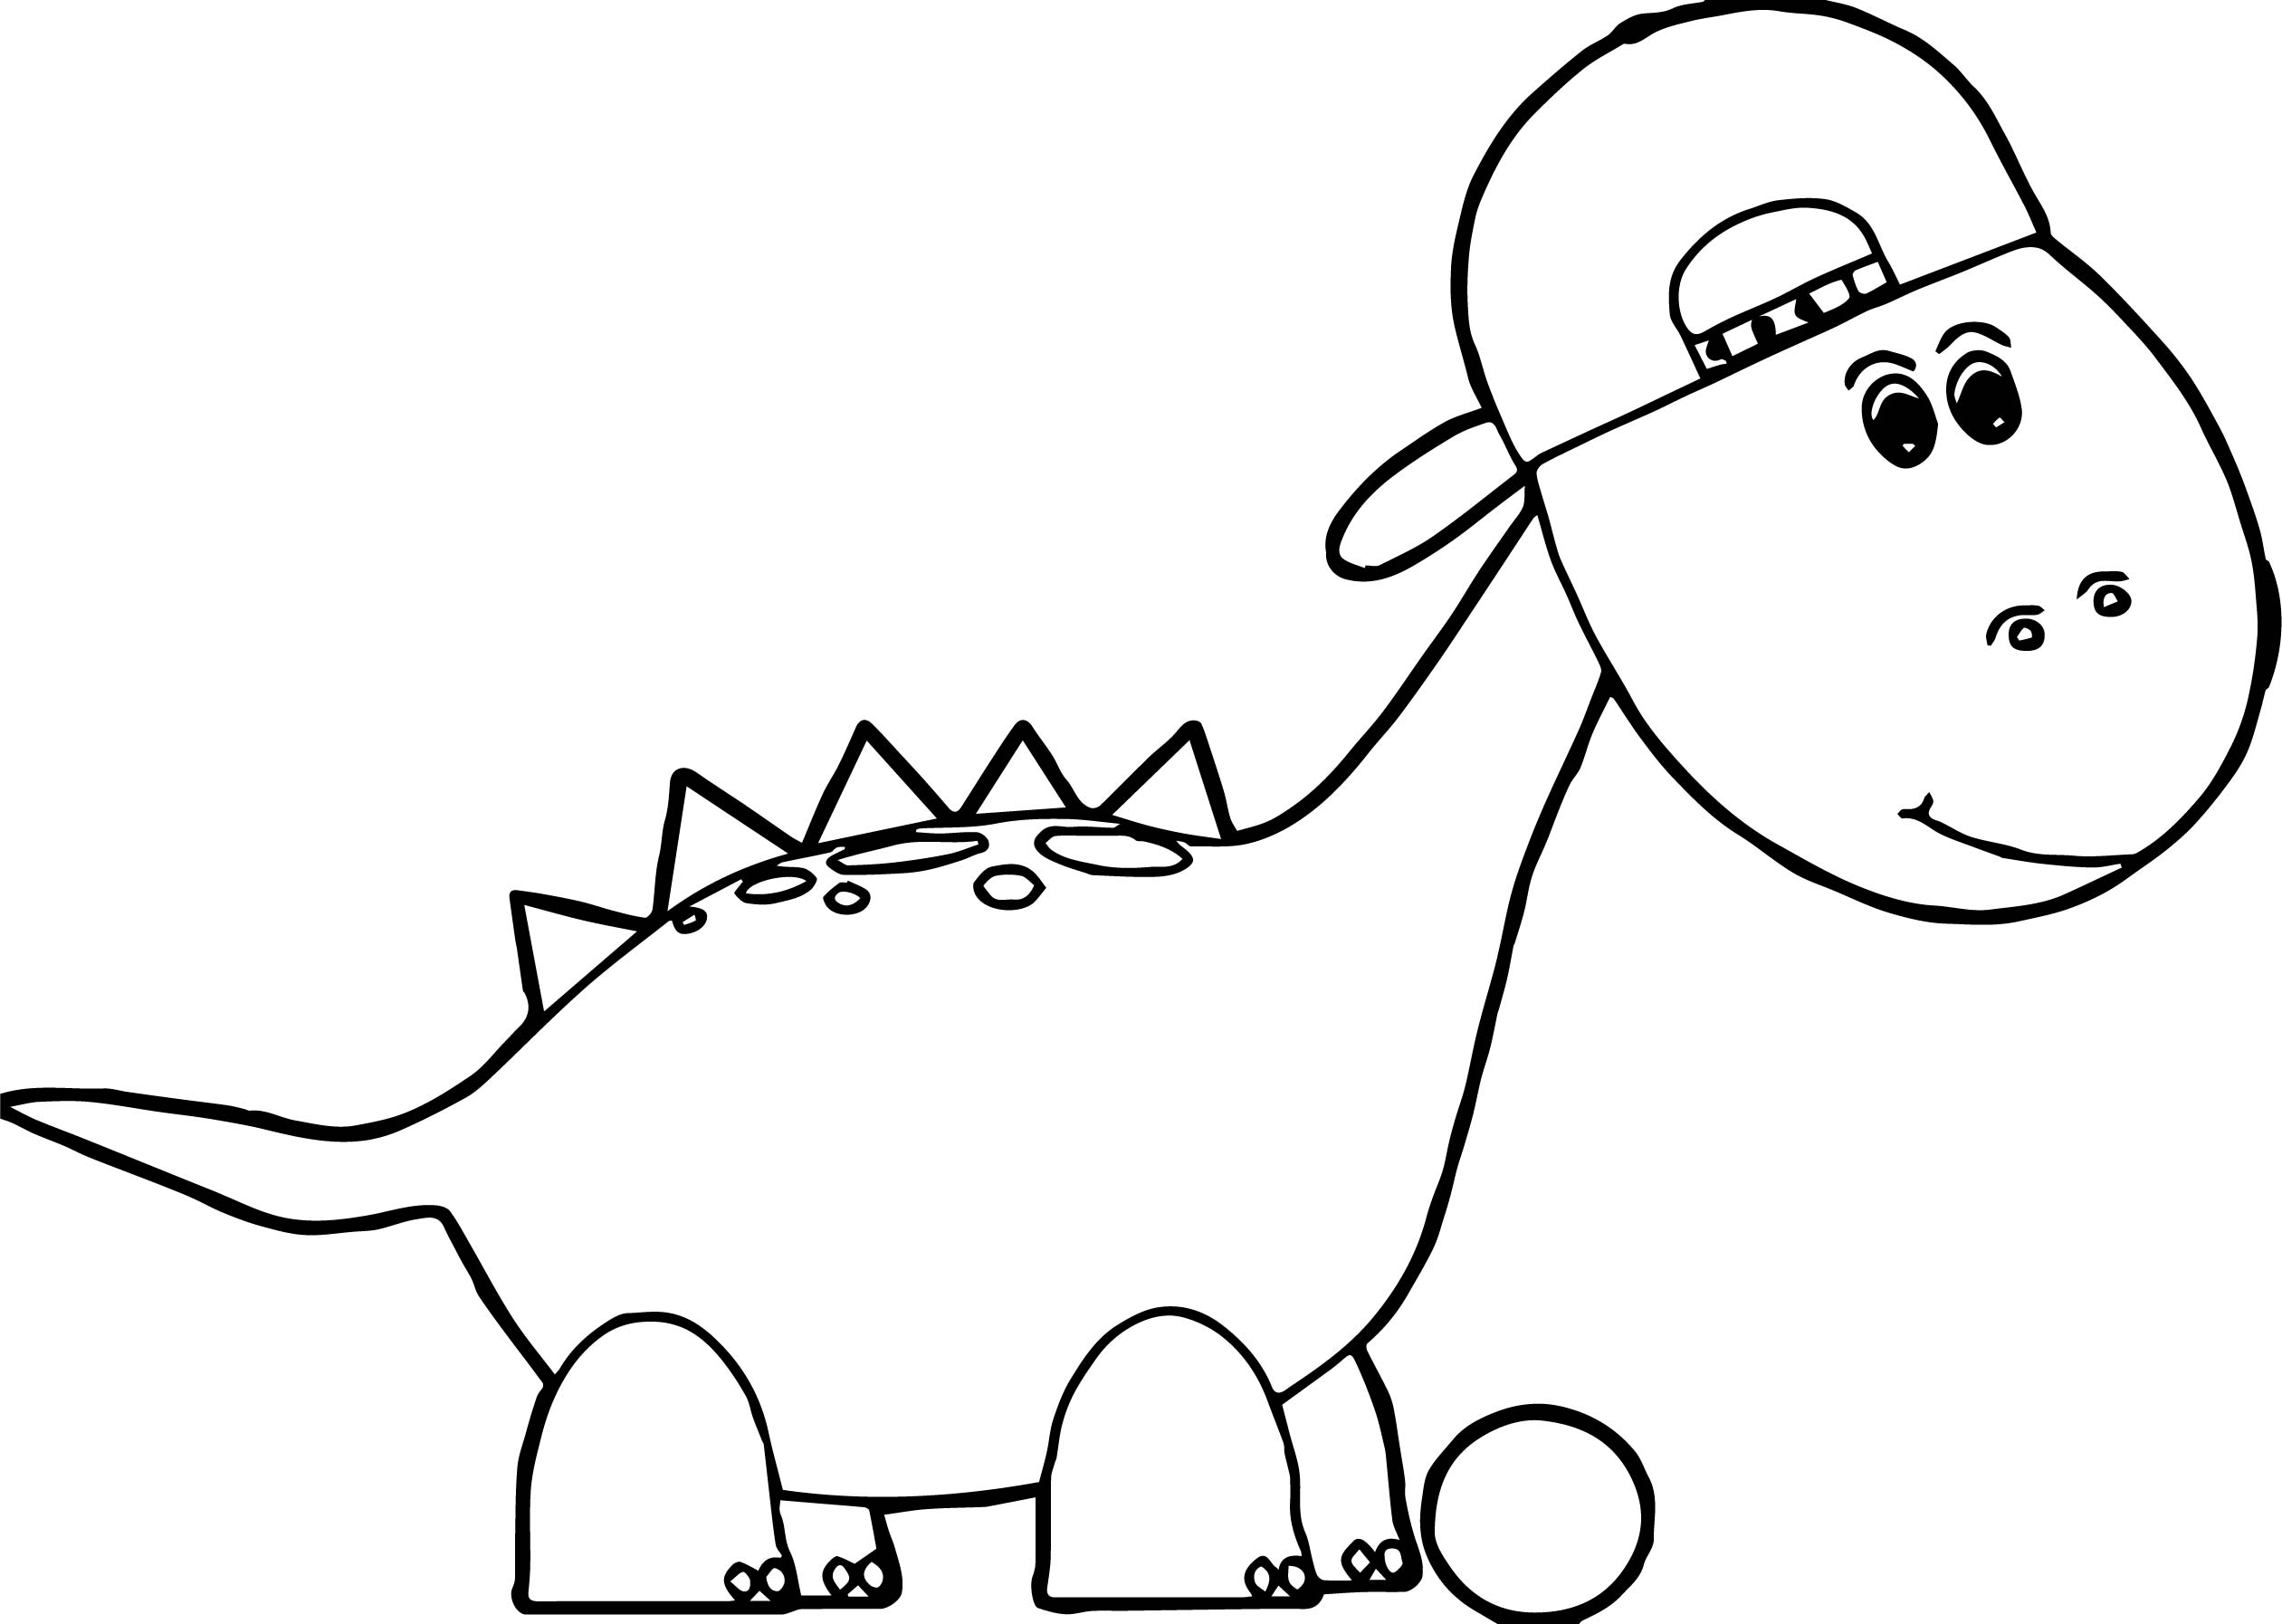 Dinosaur Egg Coloring Page